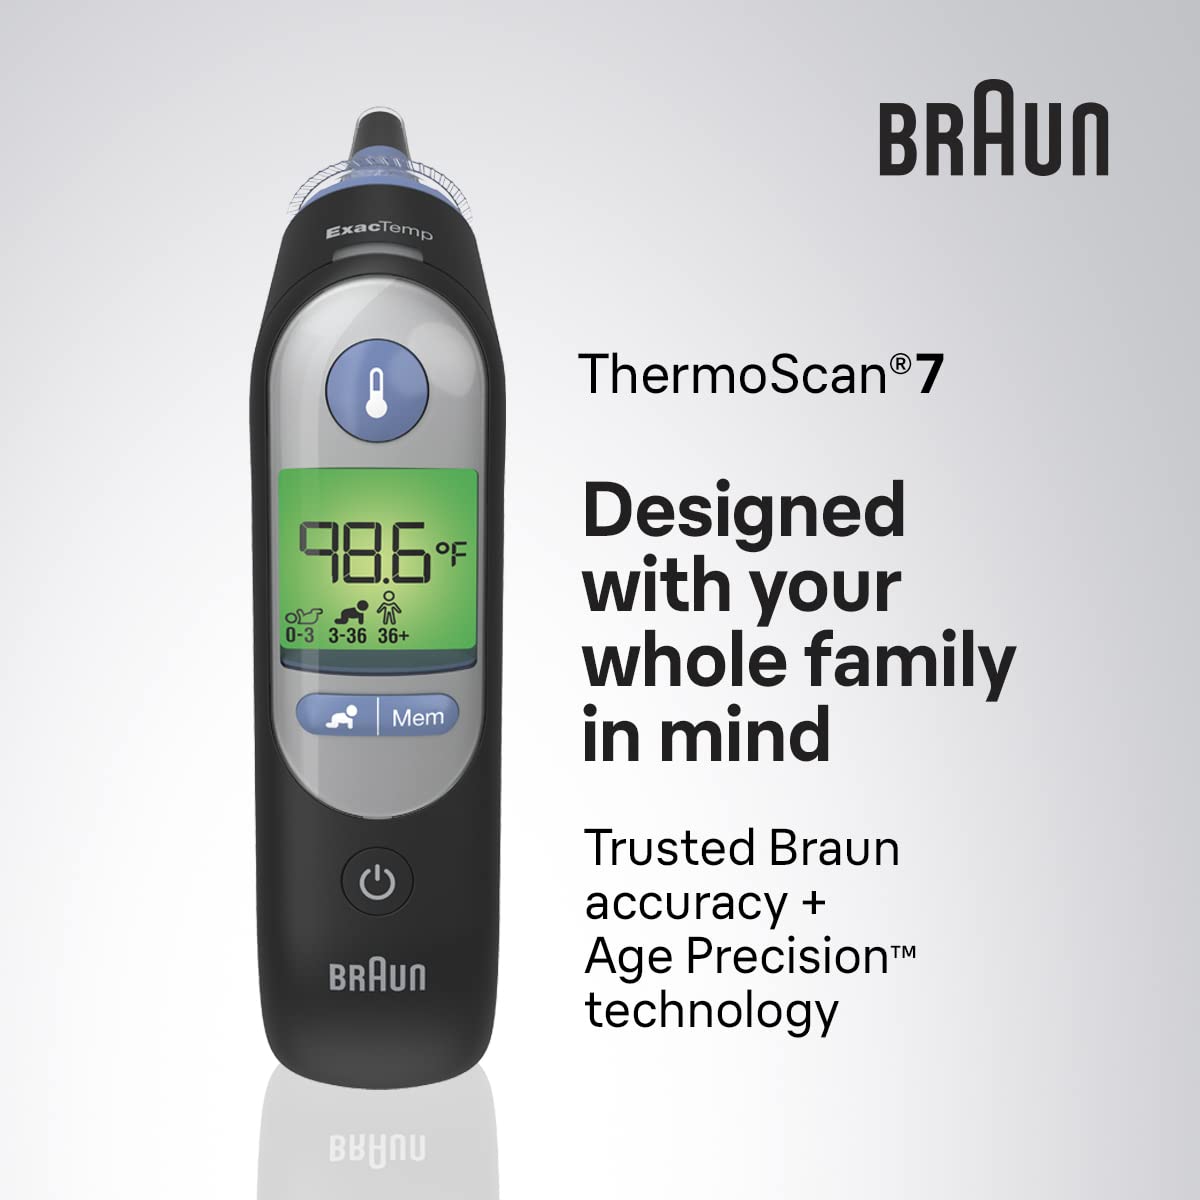 Braun Thermoscan 7 (IRT 6520) Ear Thermometer